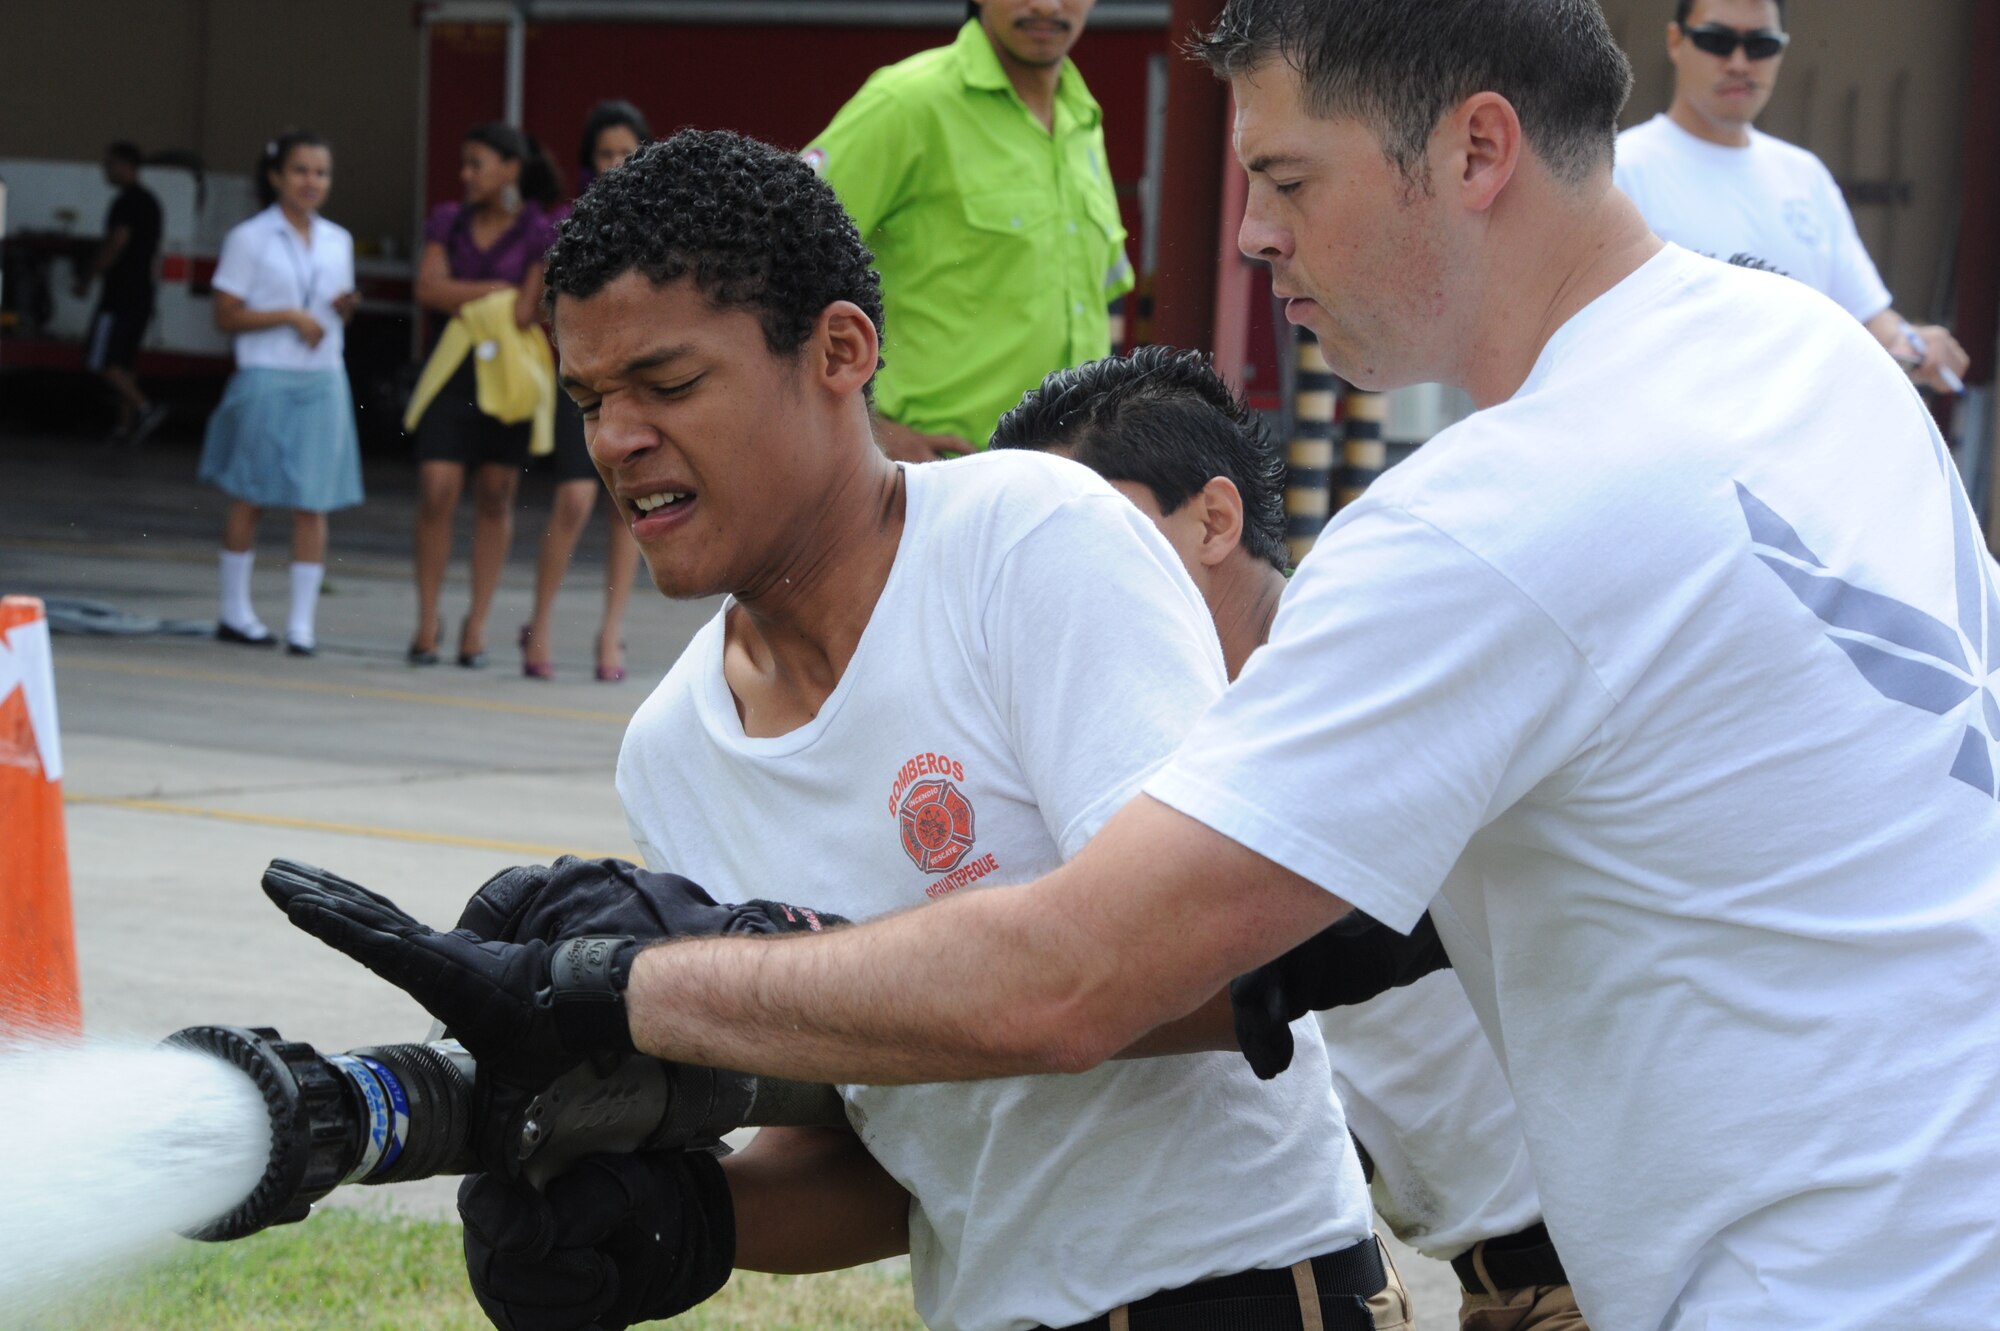 Honduran firefighters (left) receive assistance from Staff Sgt. Jack Toeller, 612th Air Base Squadron firefighter, during the hose drag portion of the Fire Muster Challenge Oct. 21, at Soto Cano Air Base, Honduras. During the muster, Honduran firefighters and Soto Cano Air Base servicemembers challenged themselves with six events simulating basic firefighting skills. (U.S. Air Force photo/Tech.Sgt. Matthew McGovern)